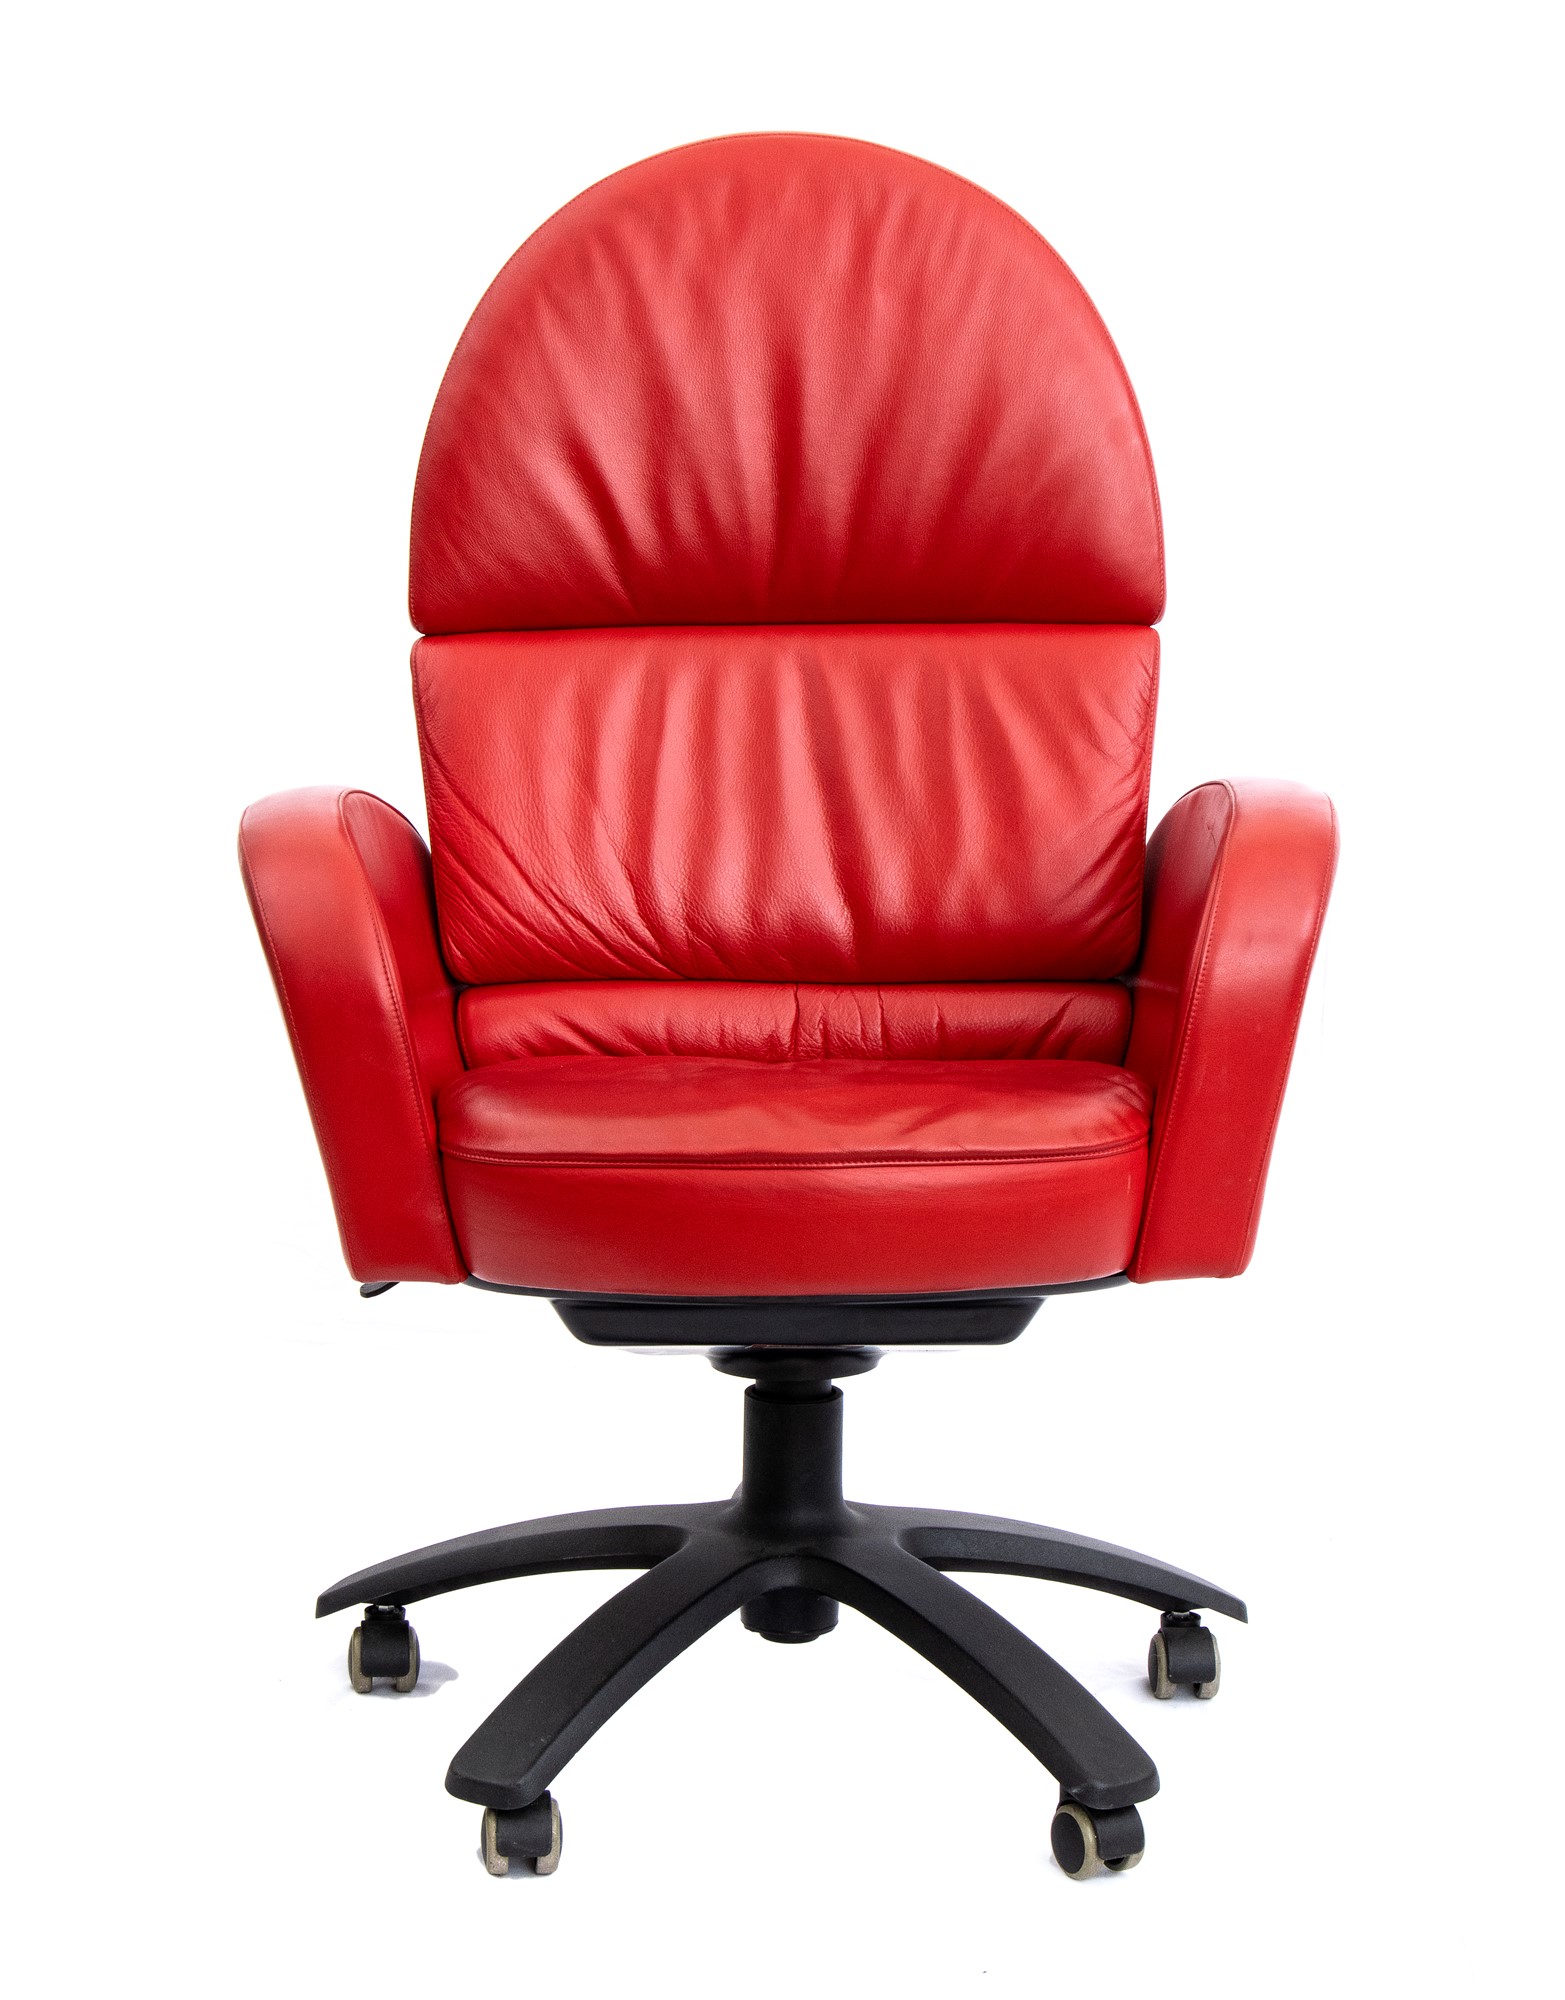 Paolo Pininfarina Torino 1958-Torino 2024 Lot of 5 Ego armchairs and Ego President executive chair - Image 19 of 29